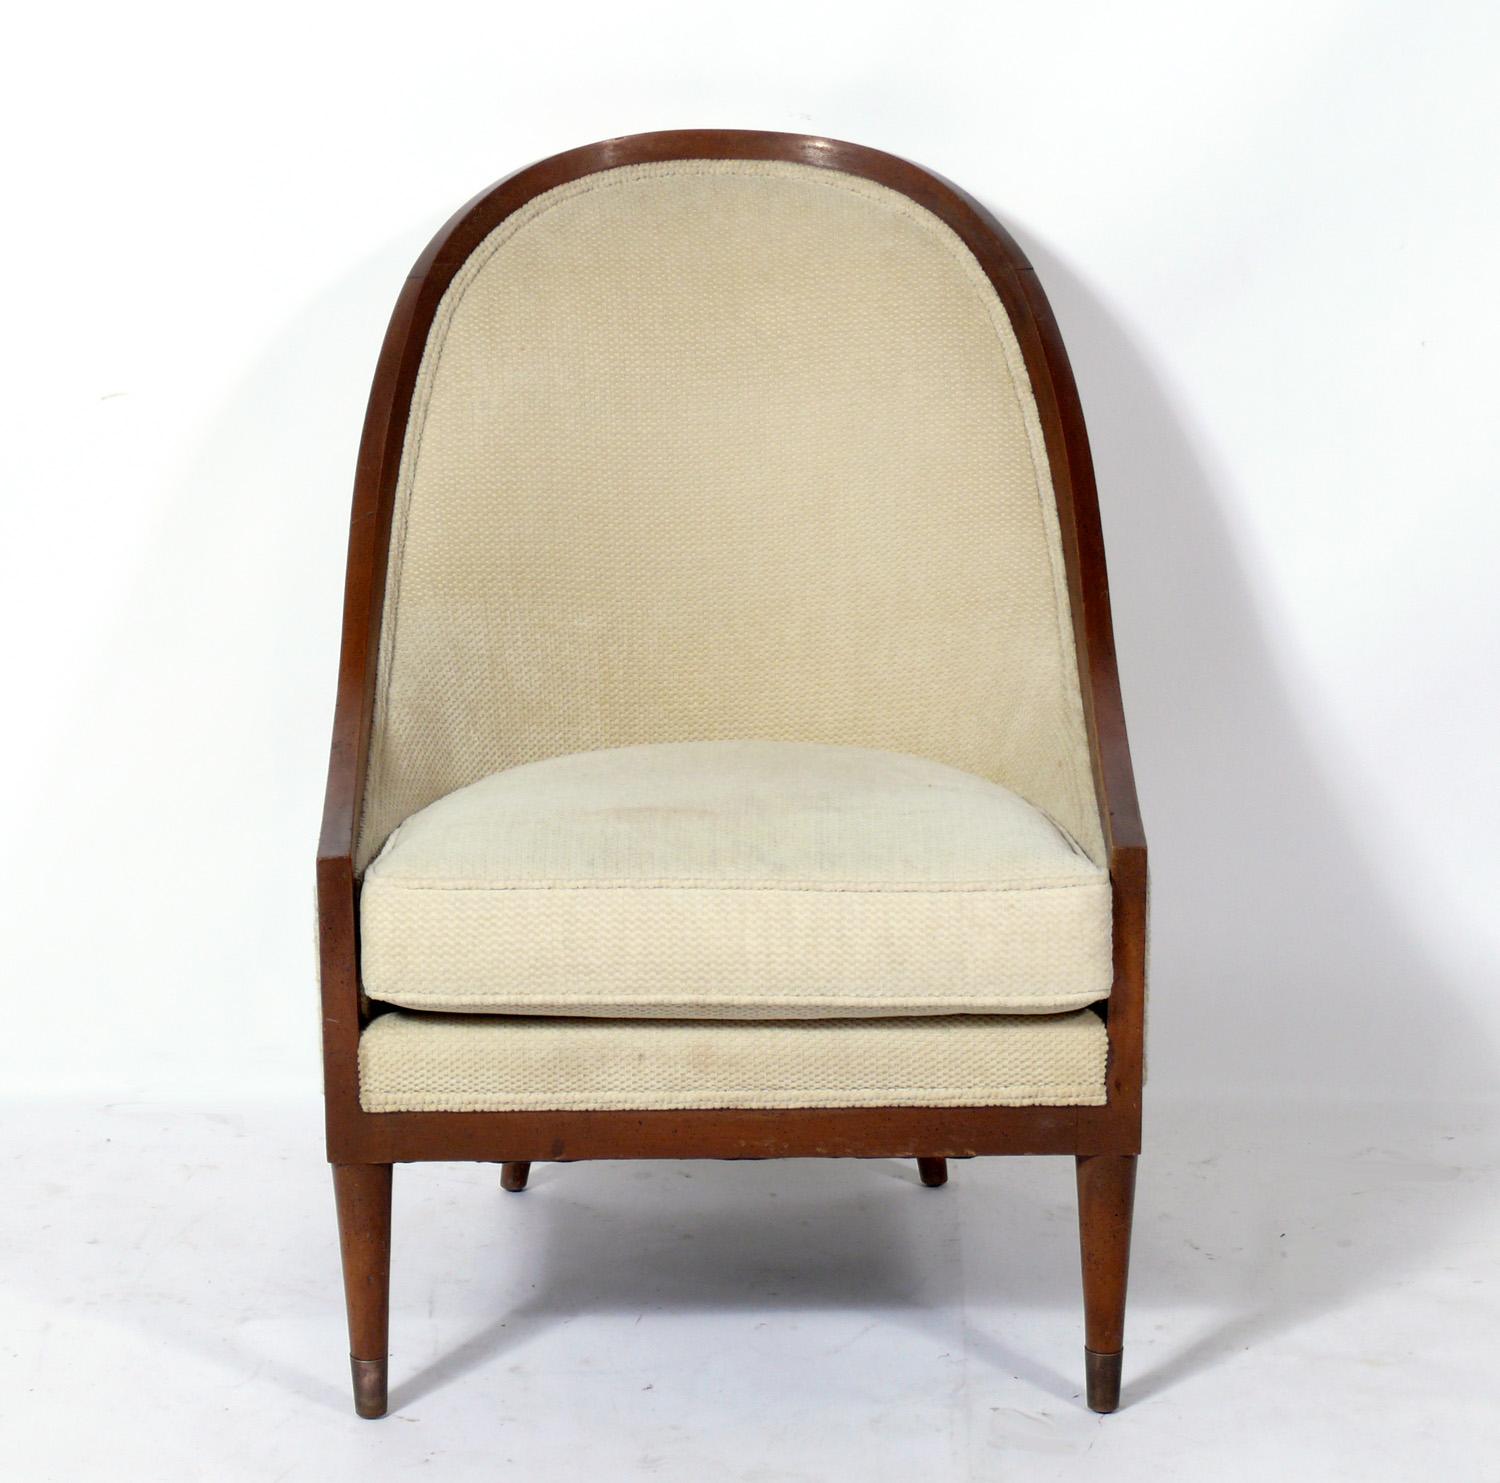 Pair of tall arch back lounge chairs, attributed to Jacques Grange for Widdicomb, circa 1990s. These chairs are currently being refinished and reupholstered and can be completed in your choice of finish color and reupholstered in your fabric. Simply